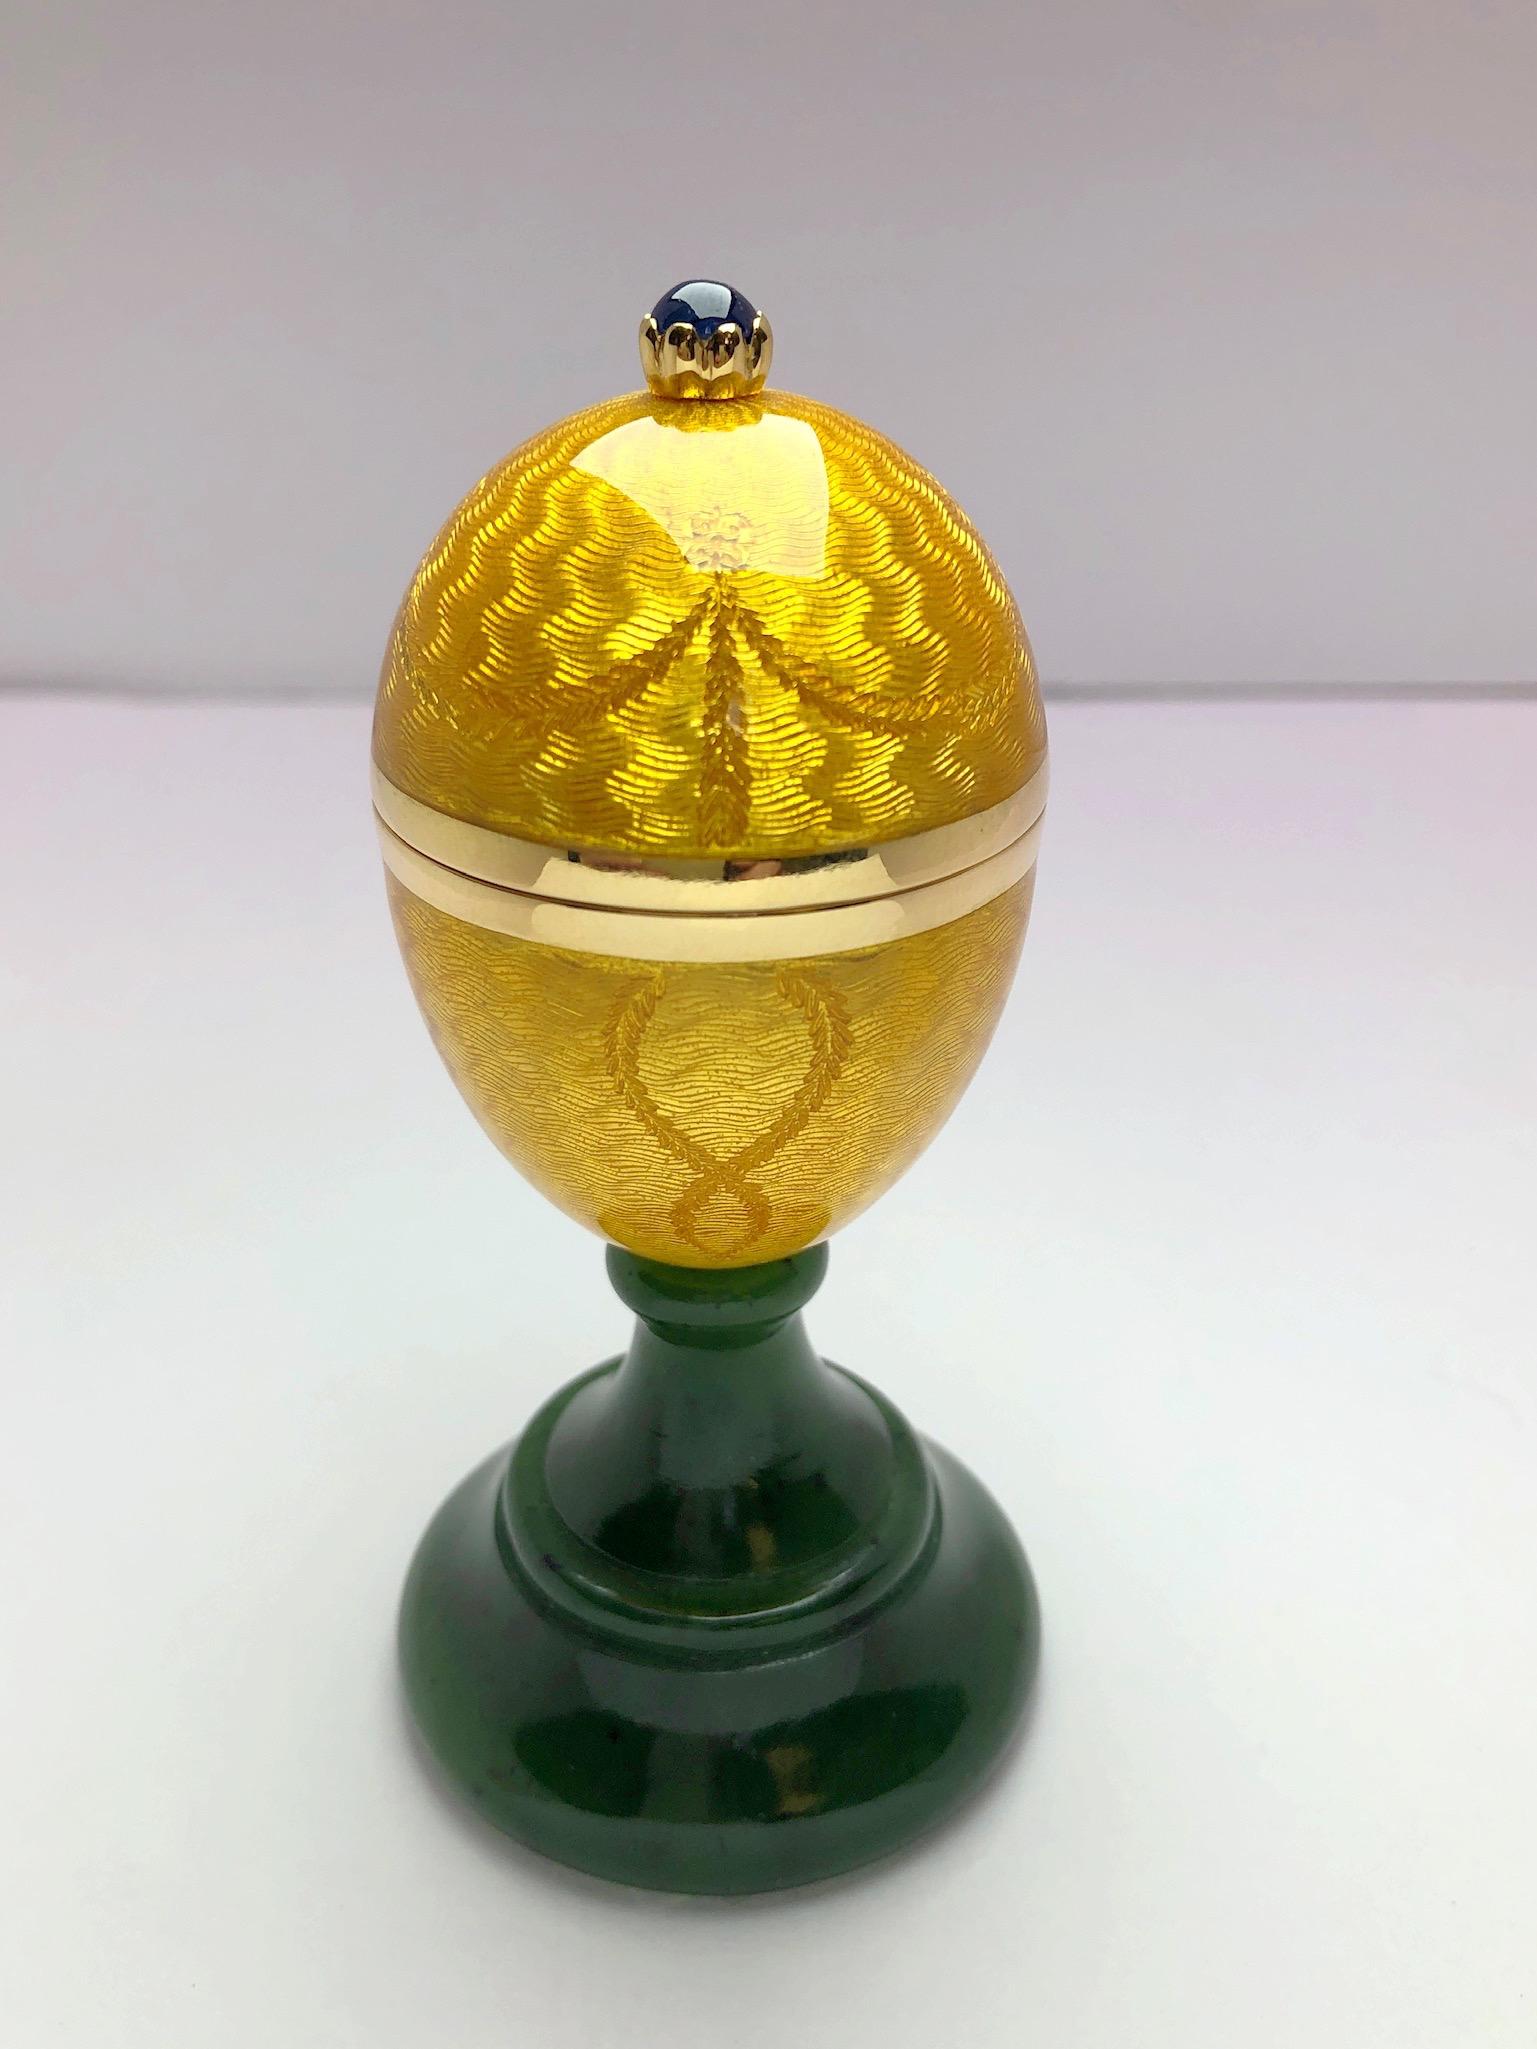 Art Nouveau Modern Faberge Enamel and Yellow Gold Ltd. Edition Surprise Egg with Chick